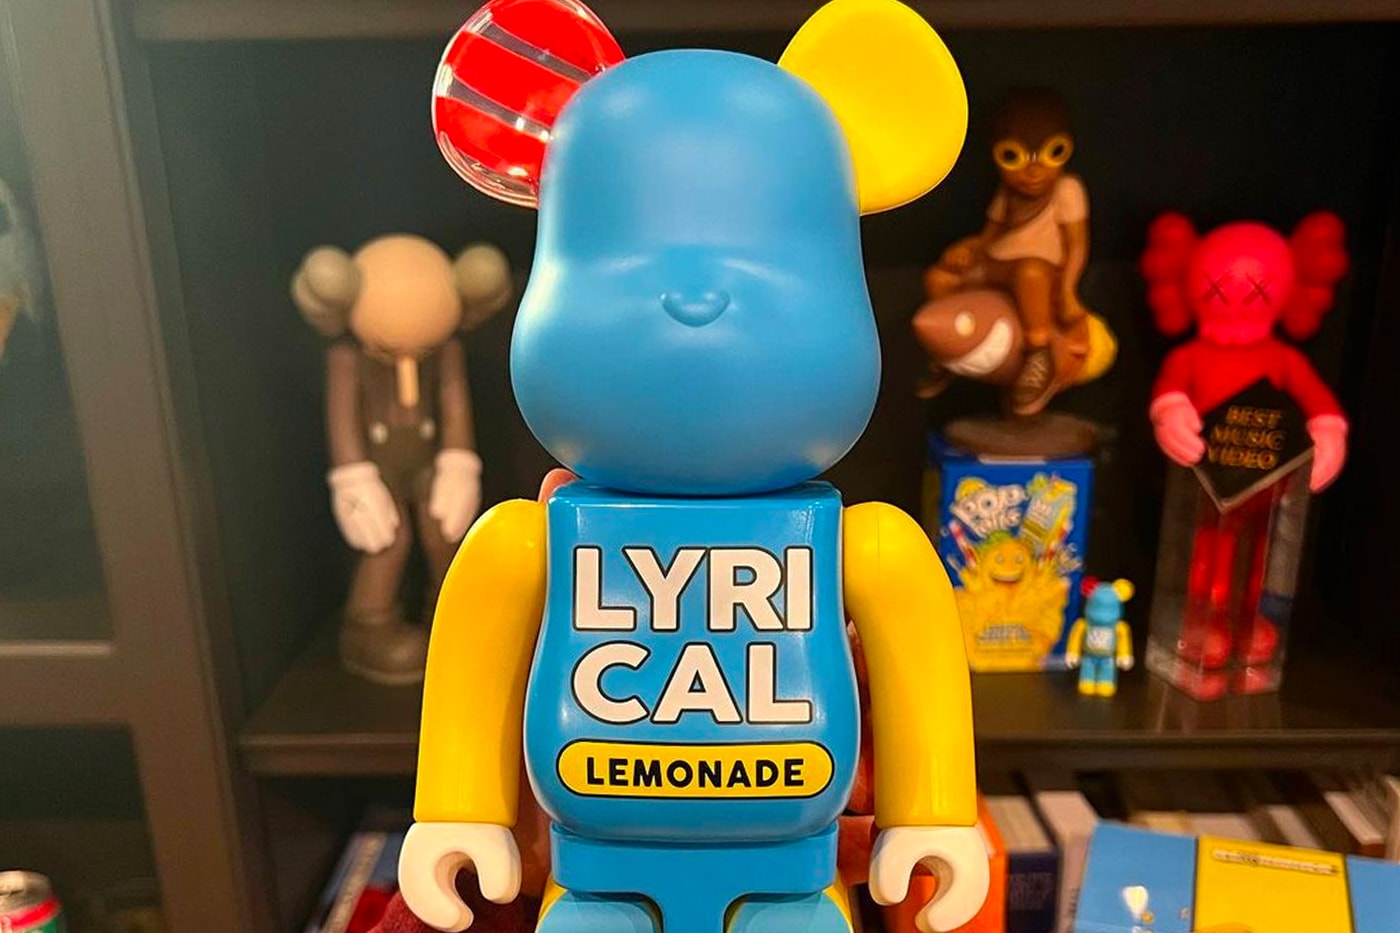 Cole Bennett 800 Lyrical Lemonade Medicom Toy Bearbrick 100 400 straw yellow blue red collaboration new coming soon release info 